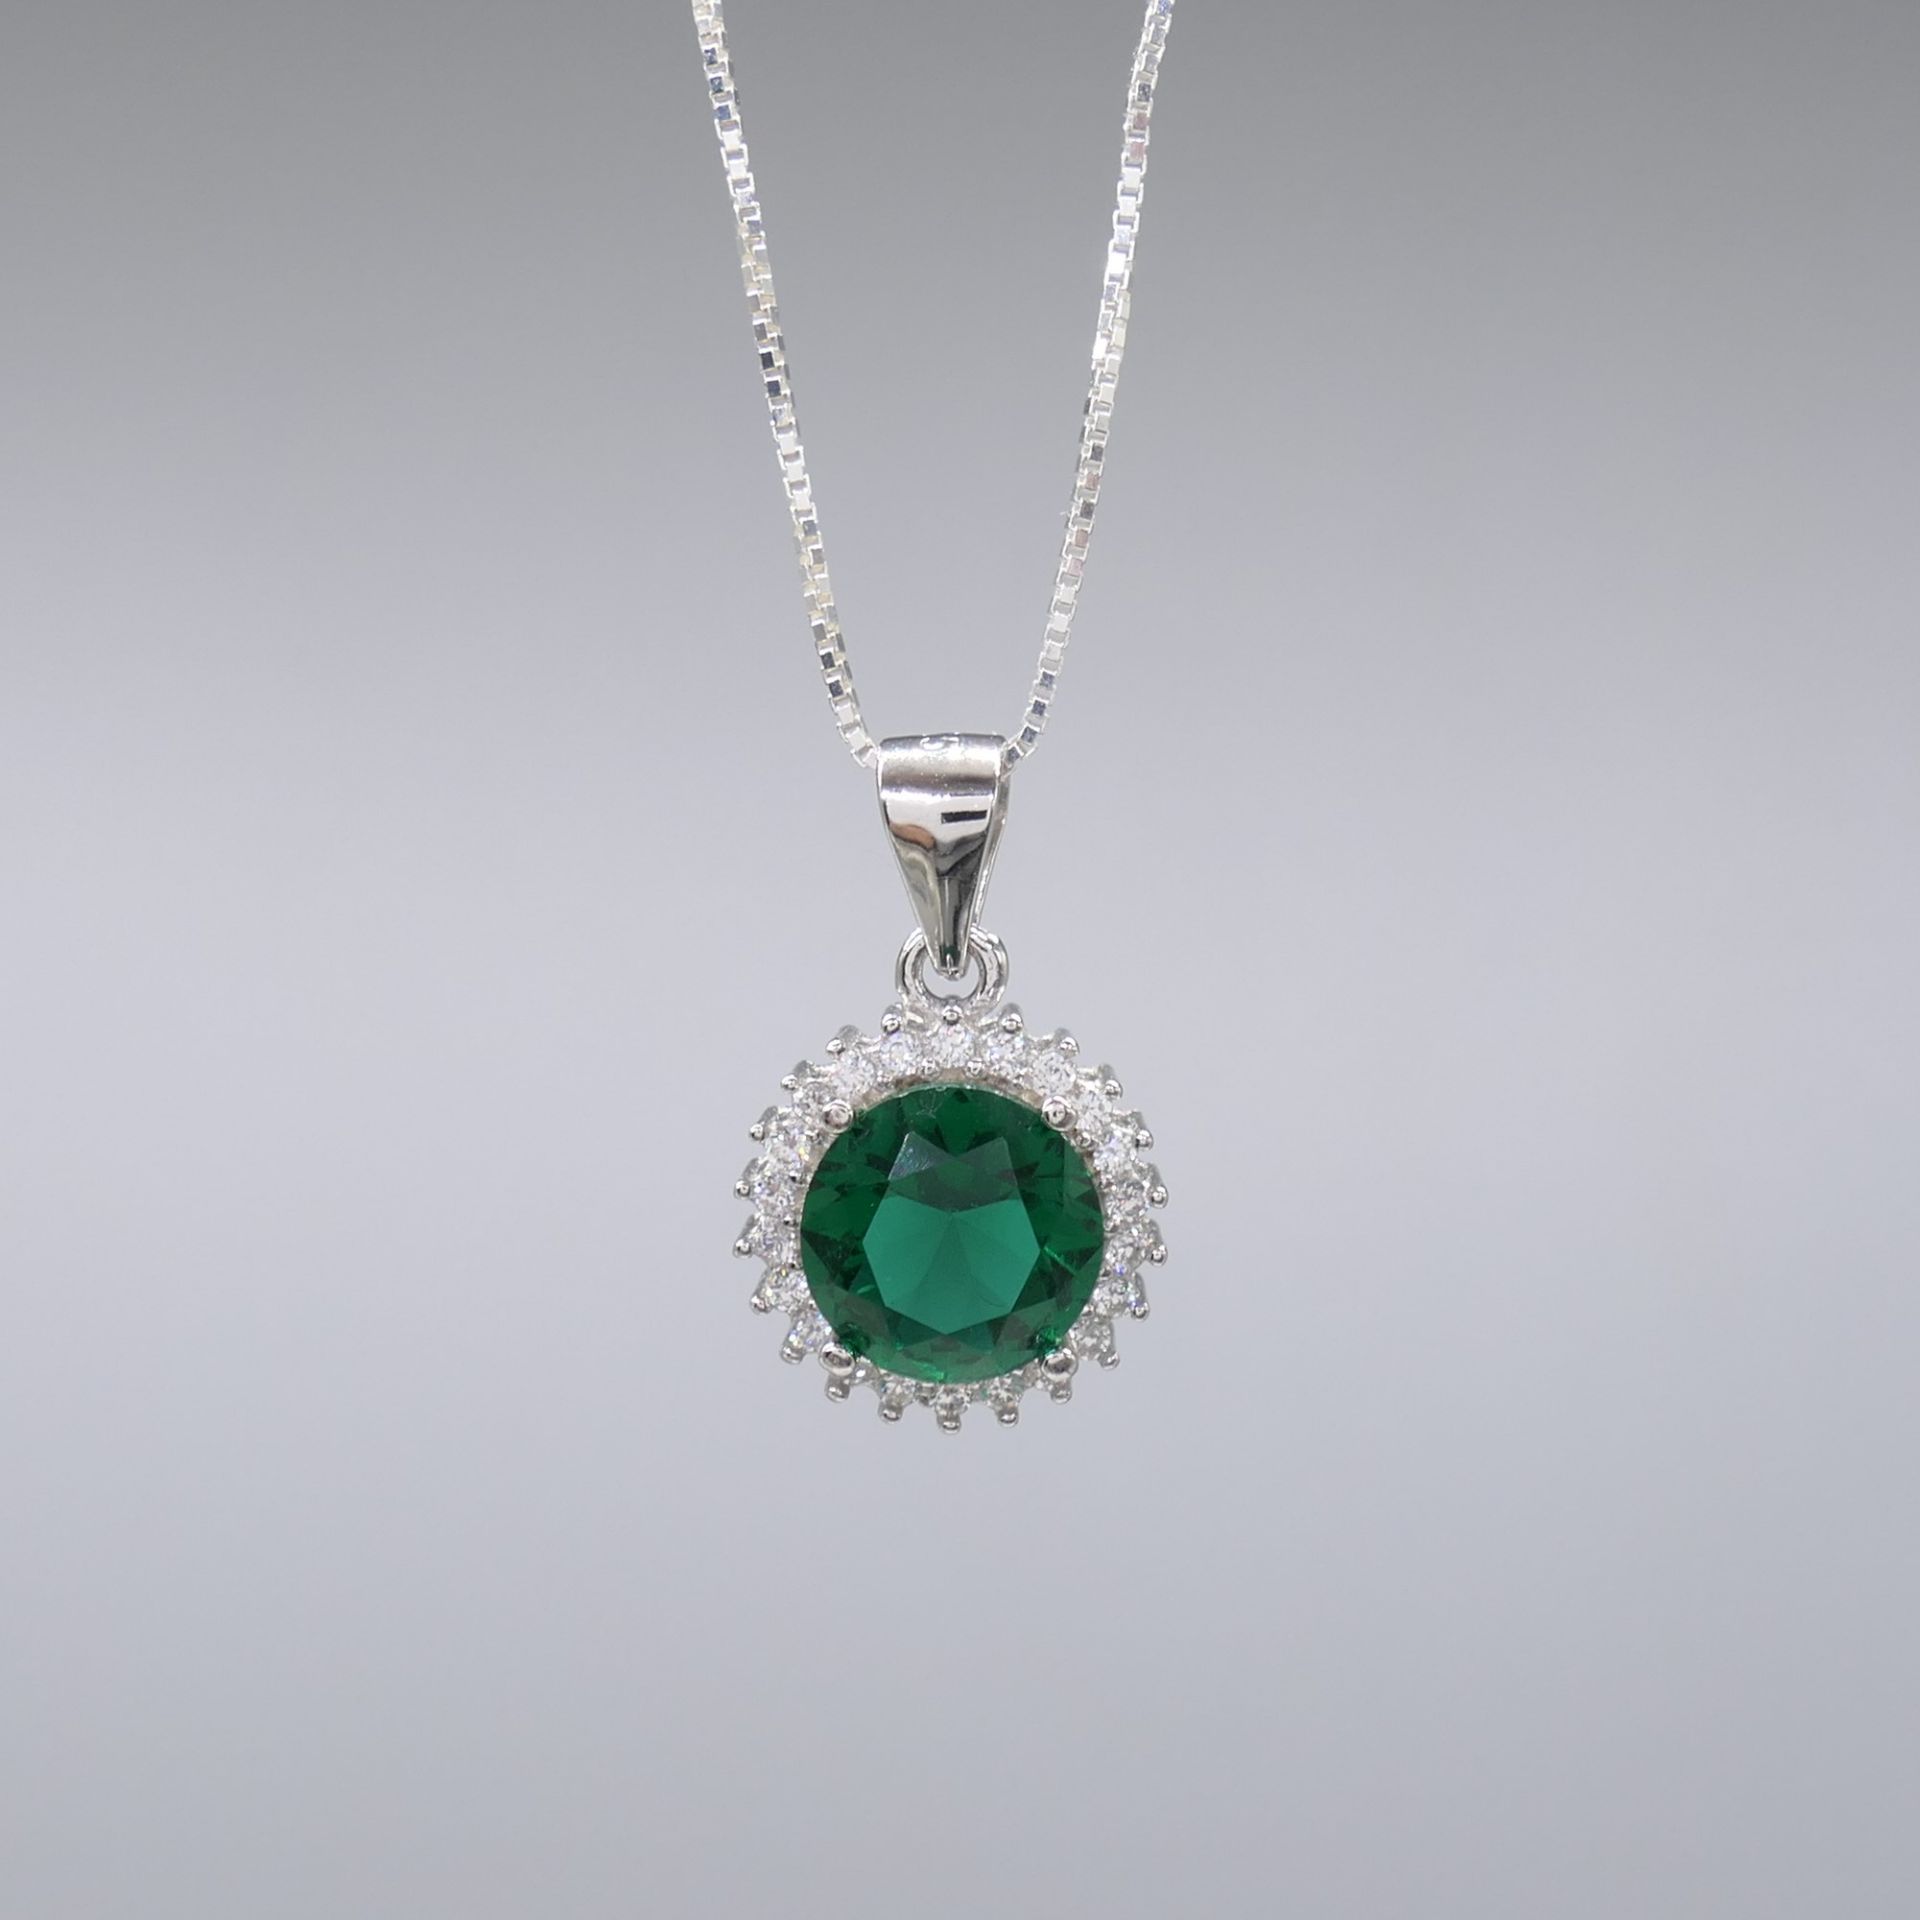 Green gem pendant and chain in sterling silver - Image 3 of 6